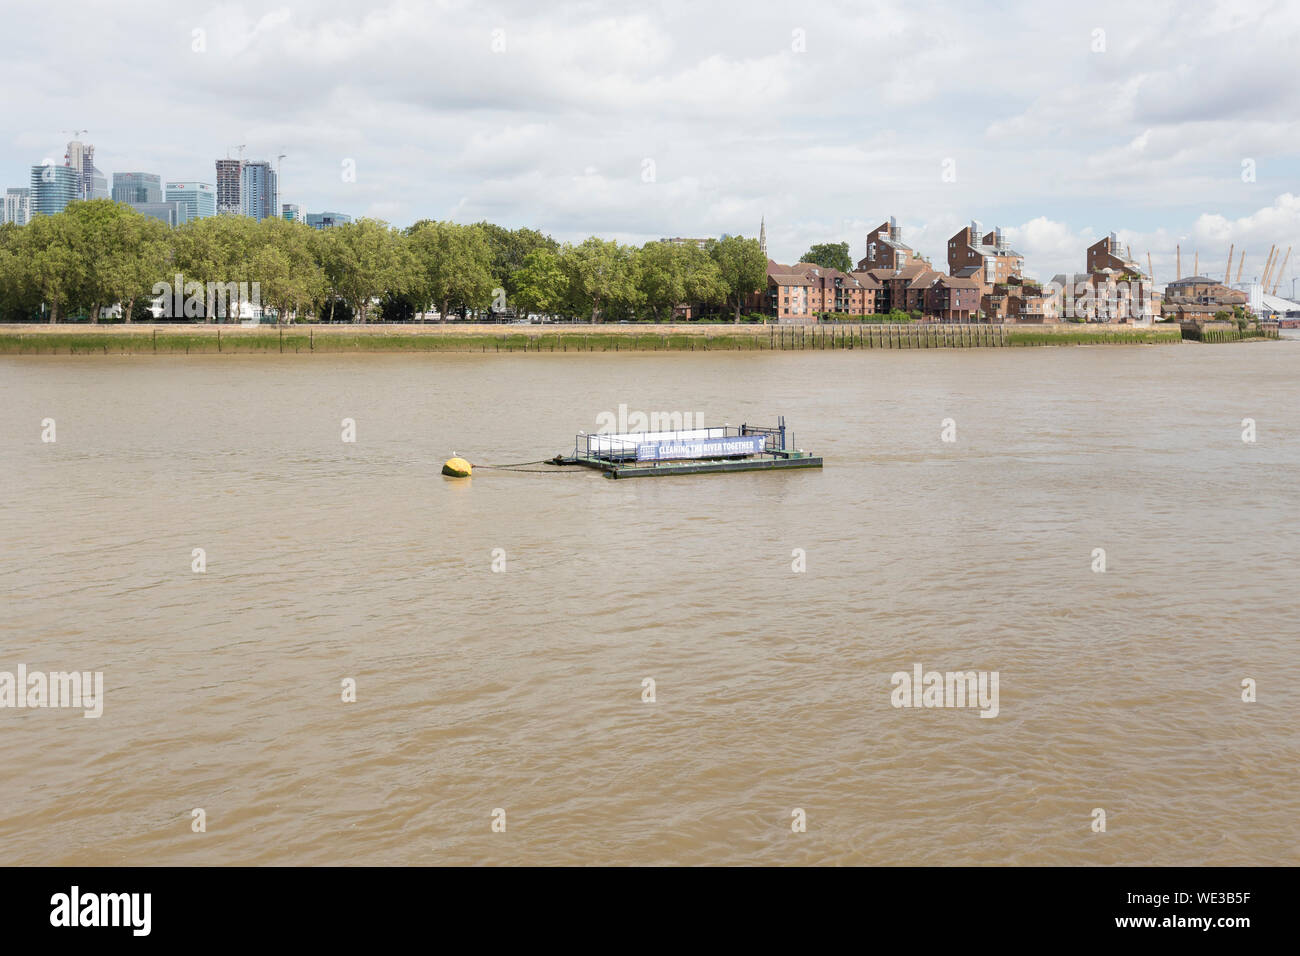 A litter trap on the river Thames, London, UK Stock Photo